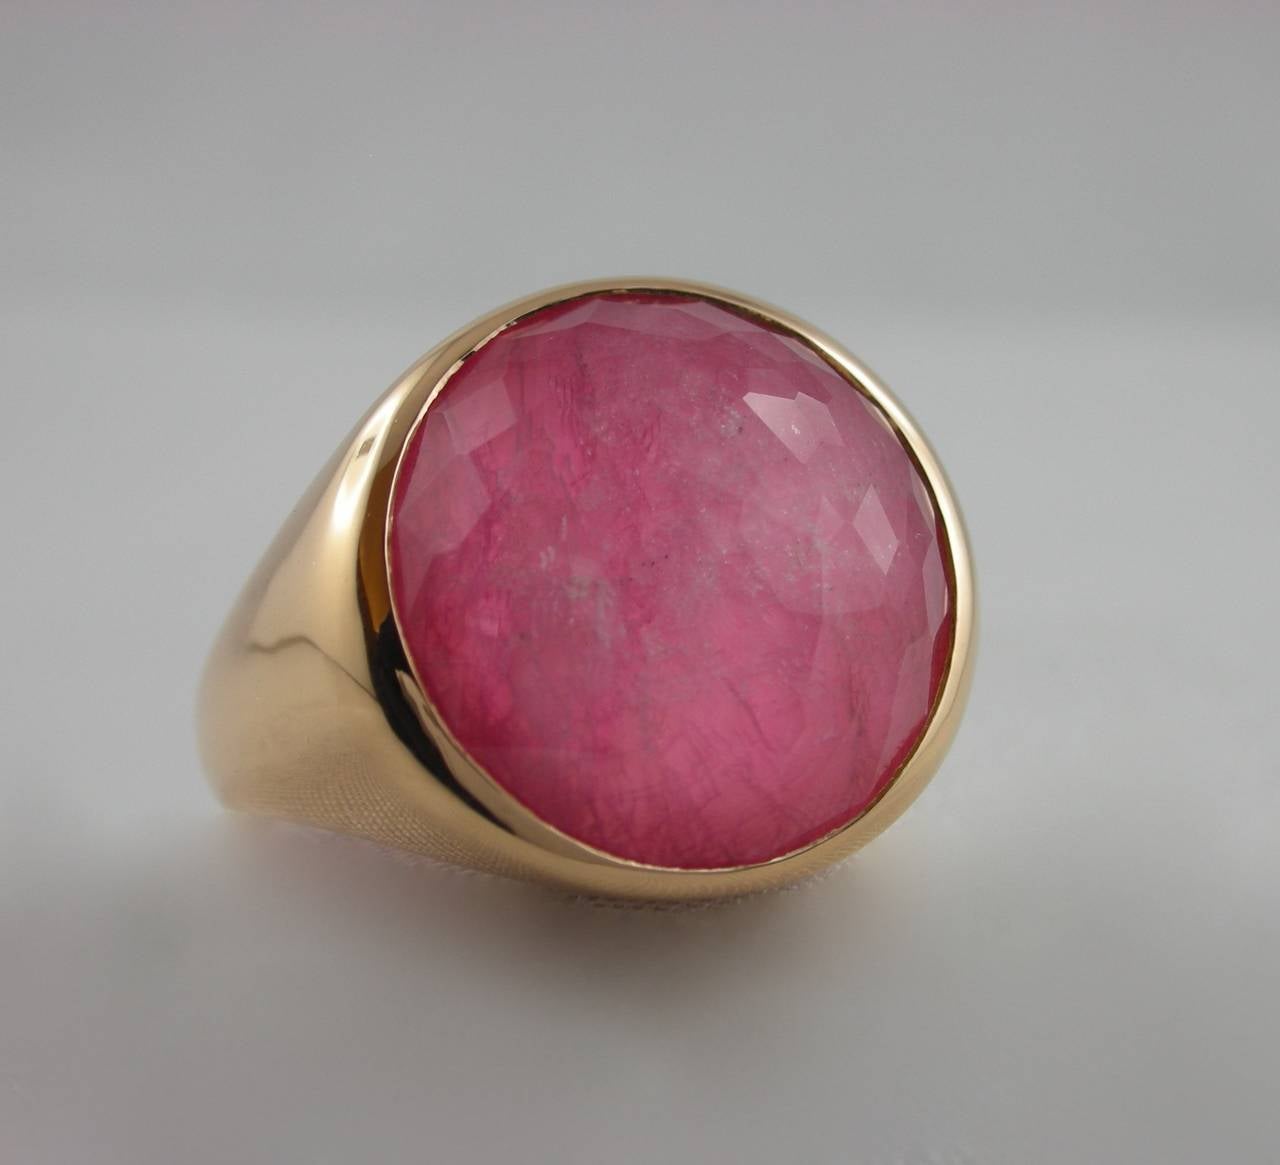 Jona design collection, hand crafted in Italy, 18 Karat rose gold ring set with a crazy cut quartz over Rubellite and mother of pearl, weighing 4 carats. 
 Size US 6.2, can be sized to any specification

All of our jewelry is new and has never